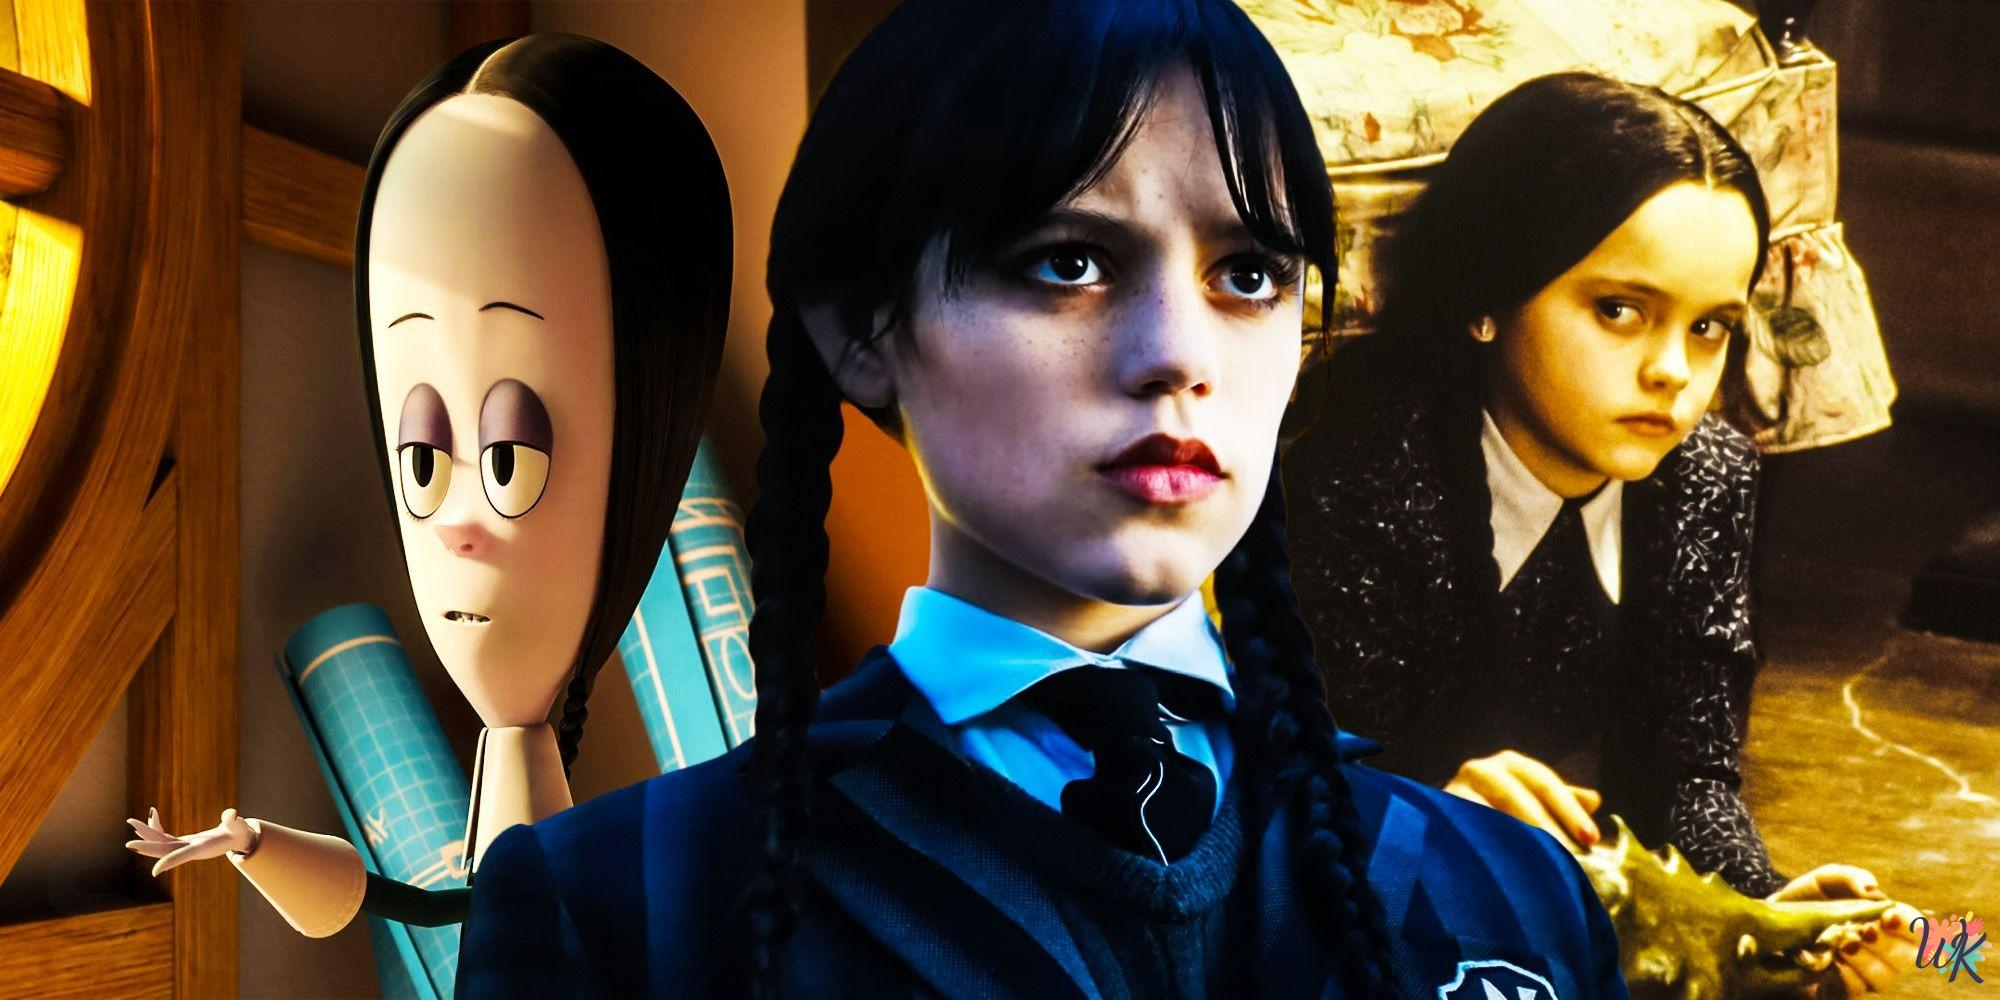 Coloring Wednesday Addams suitable for children to color